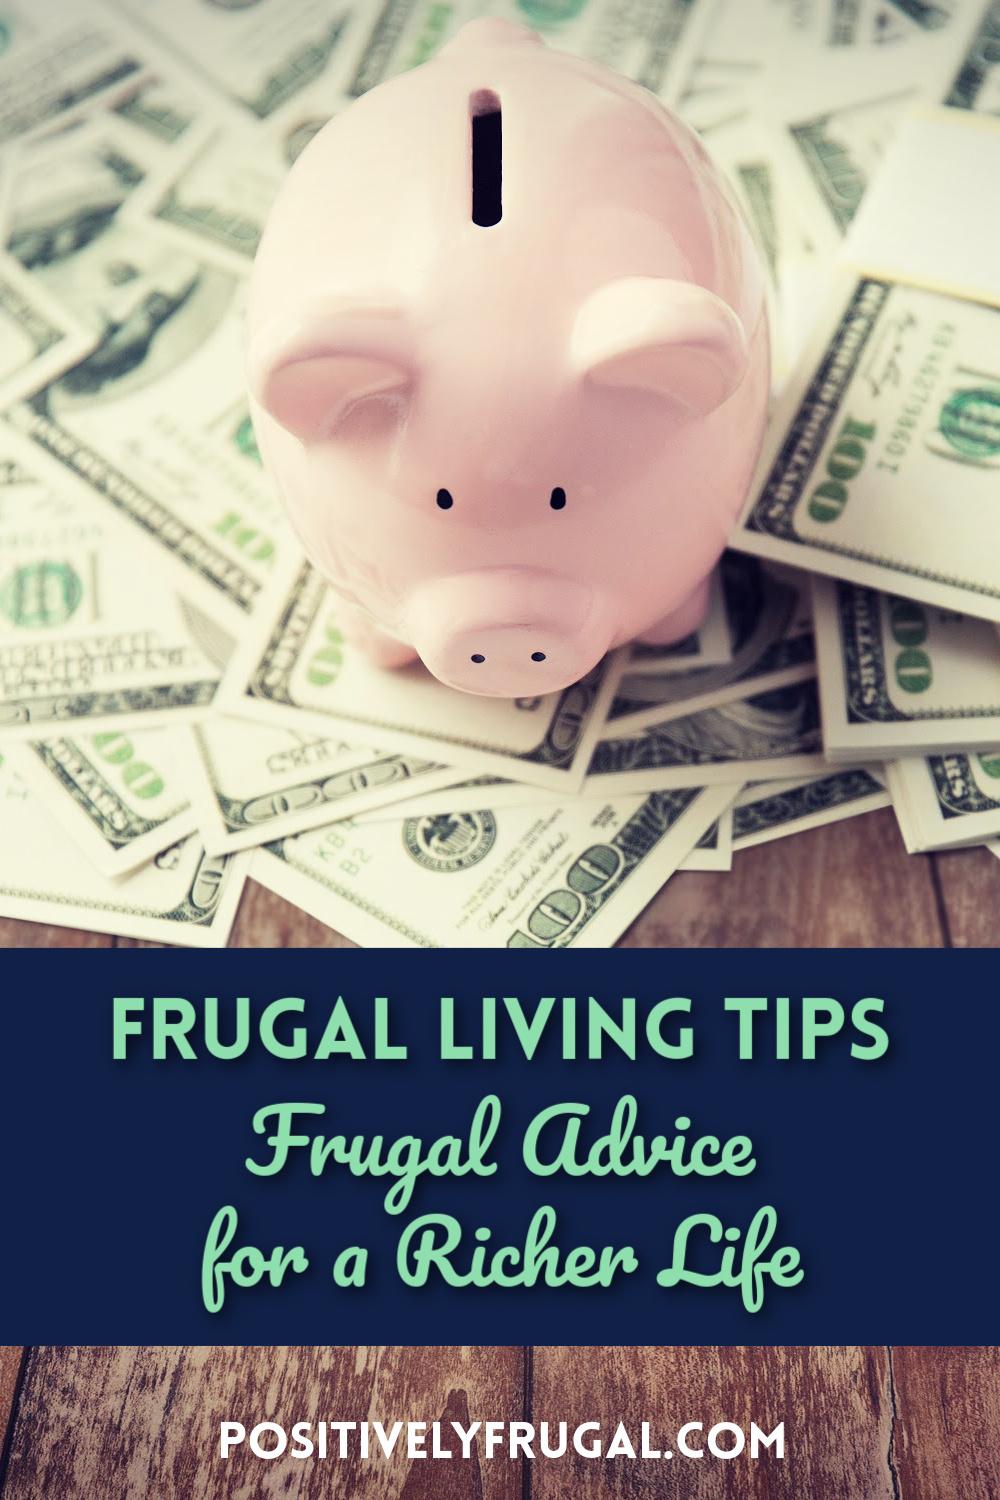 Frugal Living Tips Frugal Advice Richer Life by PositivelyFrugal.com